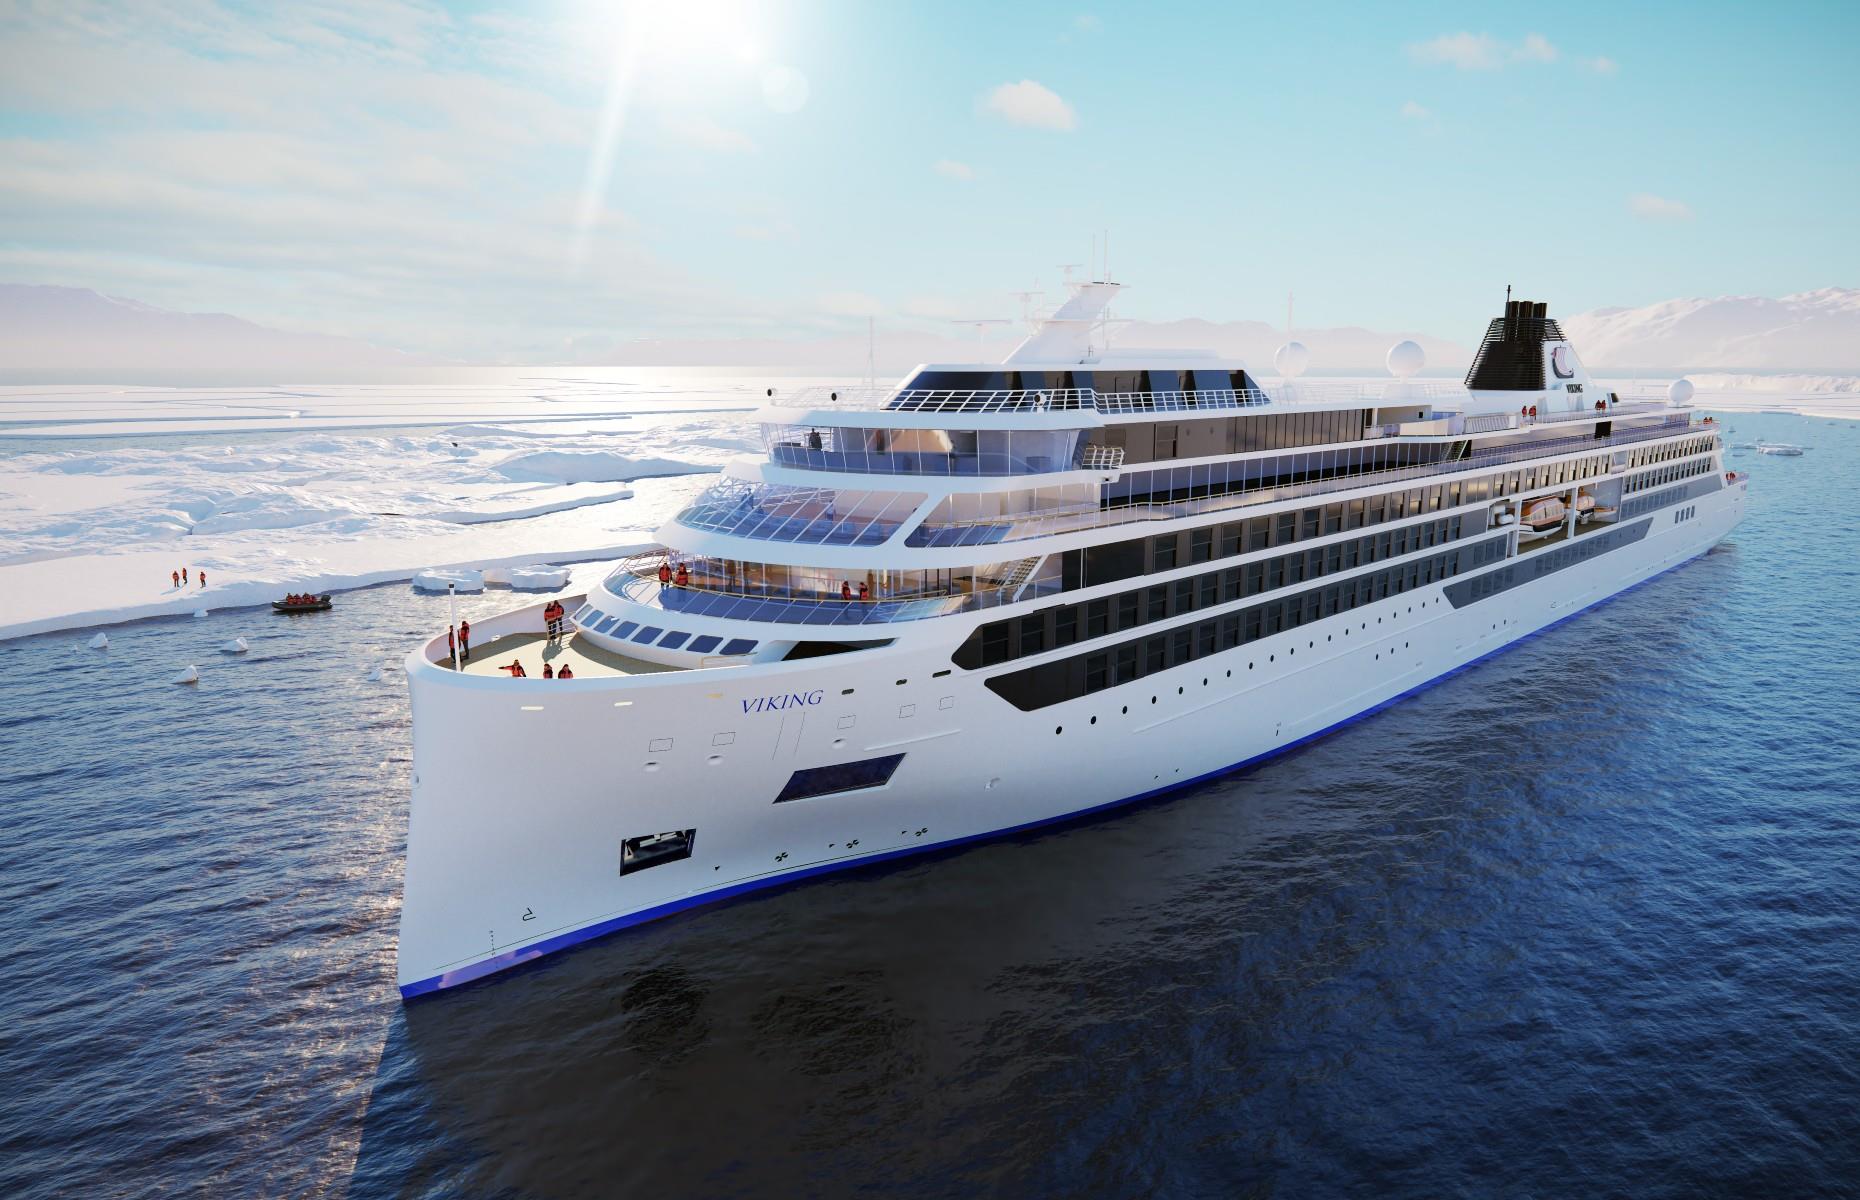 <p>The new Polar Class <a href="https://www.vikingcruises.com/expeditions/ships/viking-expedition-ships.html">Viking Octantis</a> is imagined by the same interior designers, nautical architects and engineers who designed the cruise line’s longships and ocean ships. An integrated bow creates a longer waterline for the ship, featuring the company’s signature Scandinavian influence. Each stateroom has a Nordic-style balcony and a sunroom, while floor-to-ceiling, distortion-free glass allows guests to take in the views and keep the elements out. The top of the panoramic glass lowers to transform the stateroom into a sheltered lookout.</p>